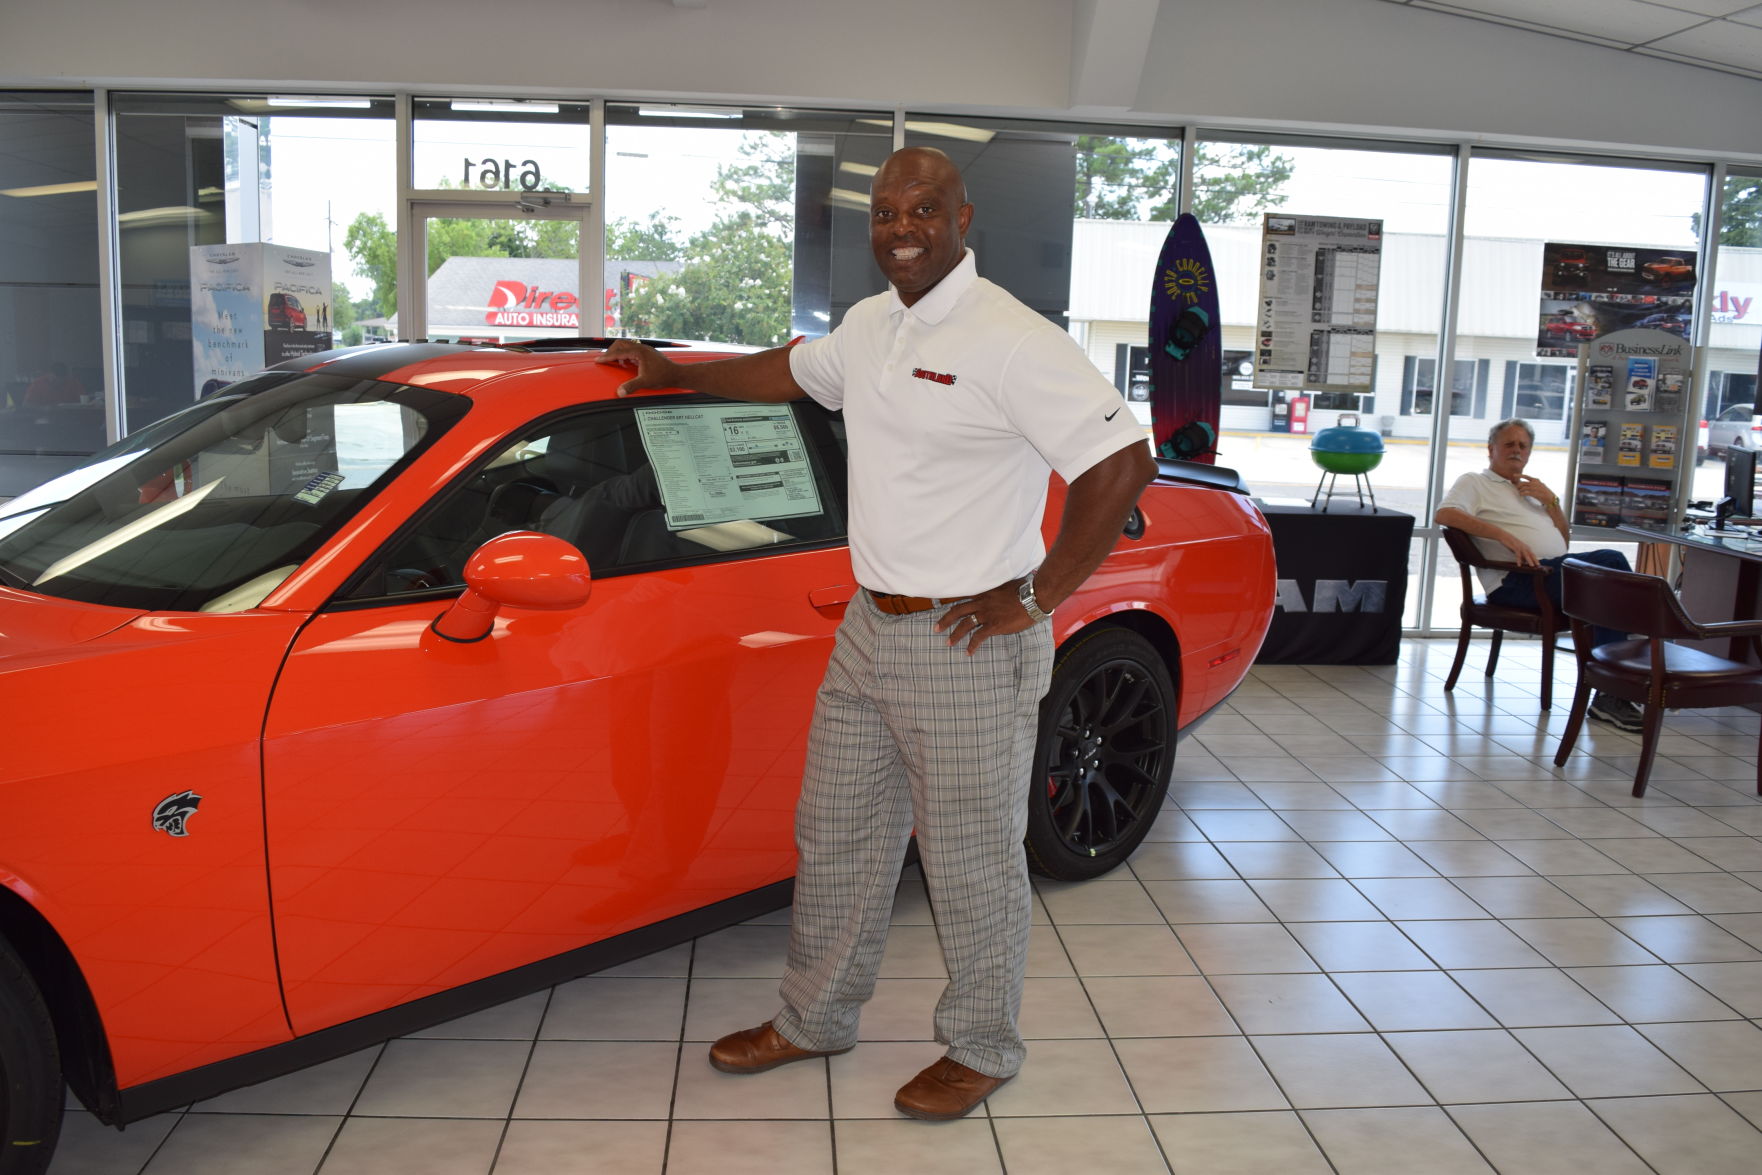 Family is a big deal at Southland Dodge - The Times of Houma/Thibodaux